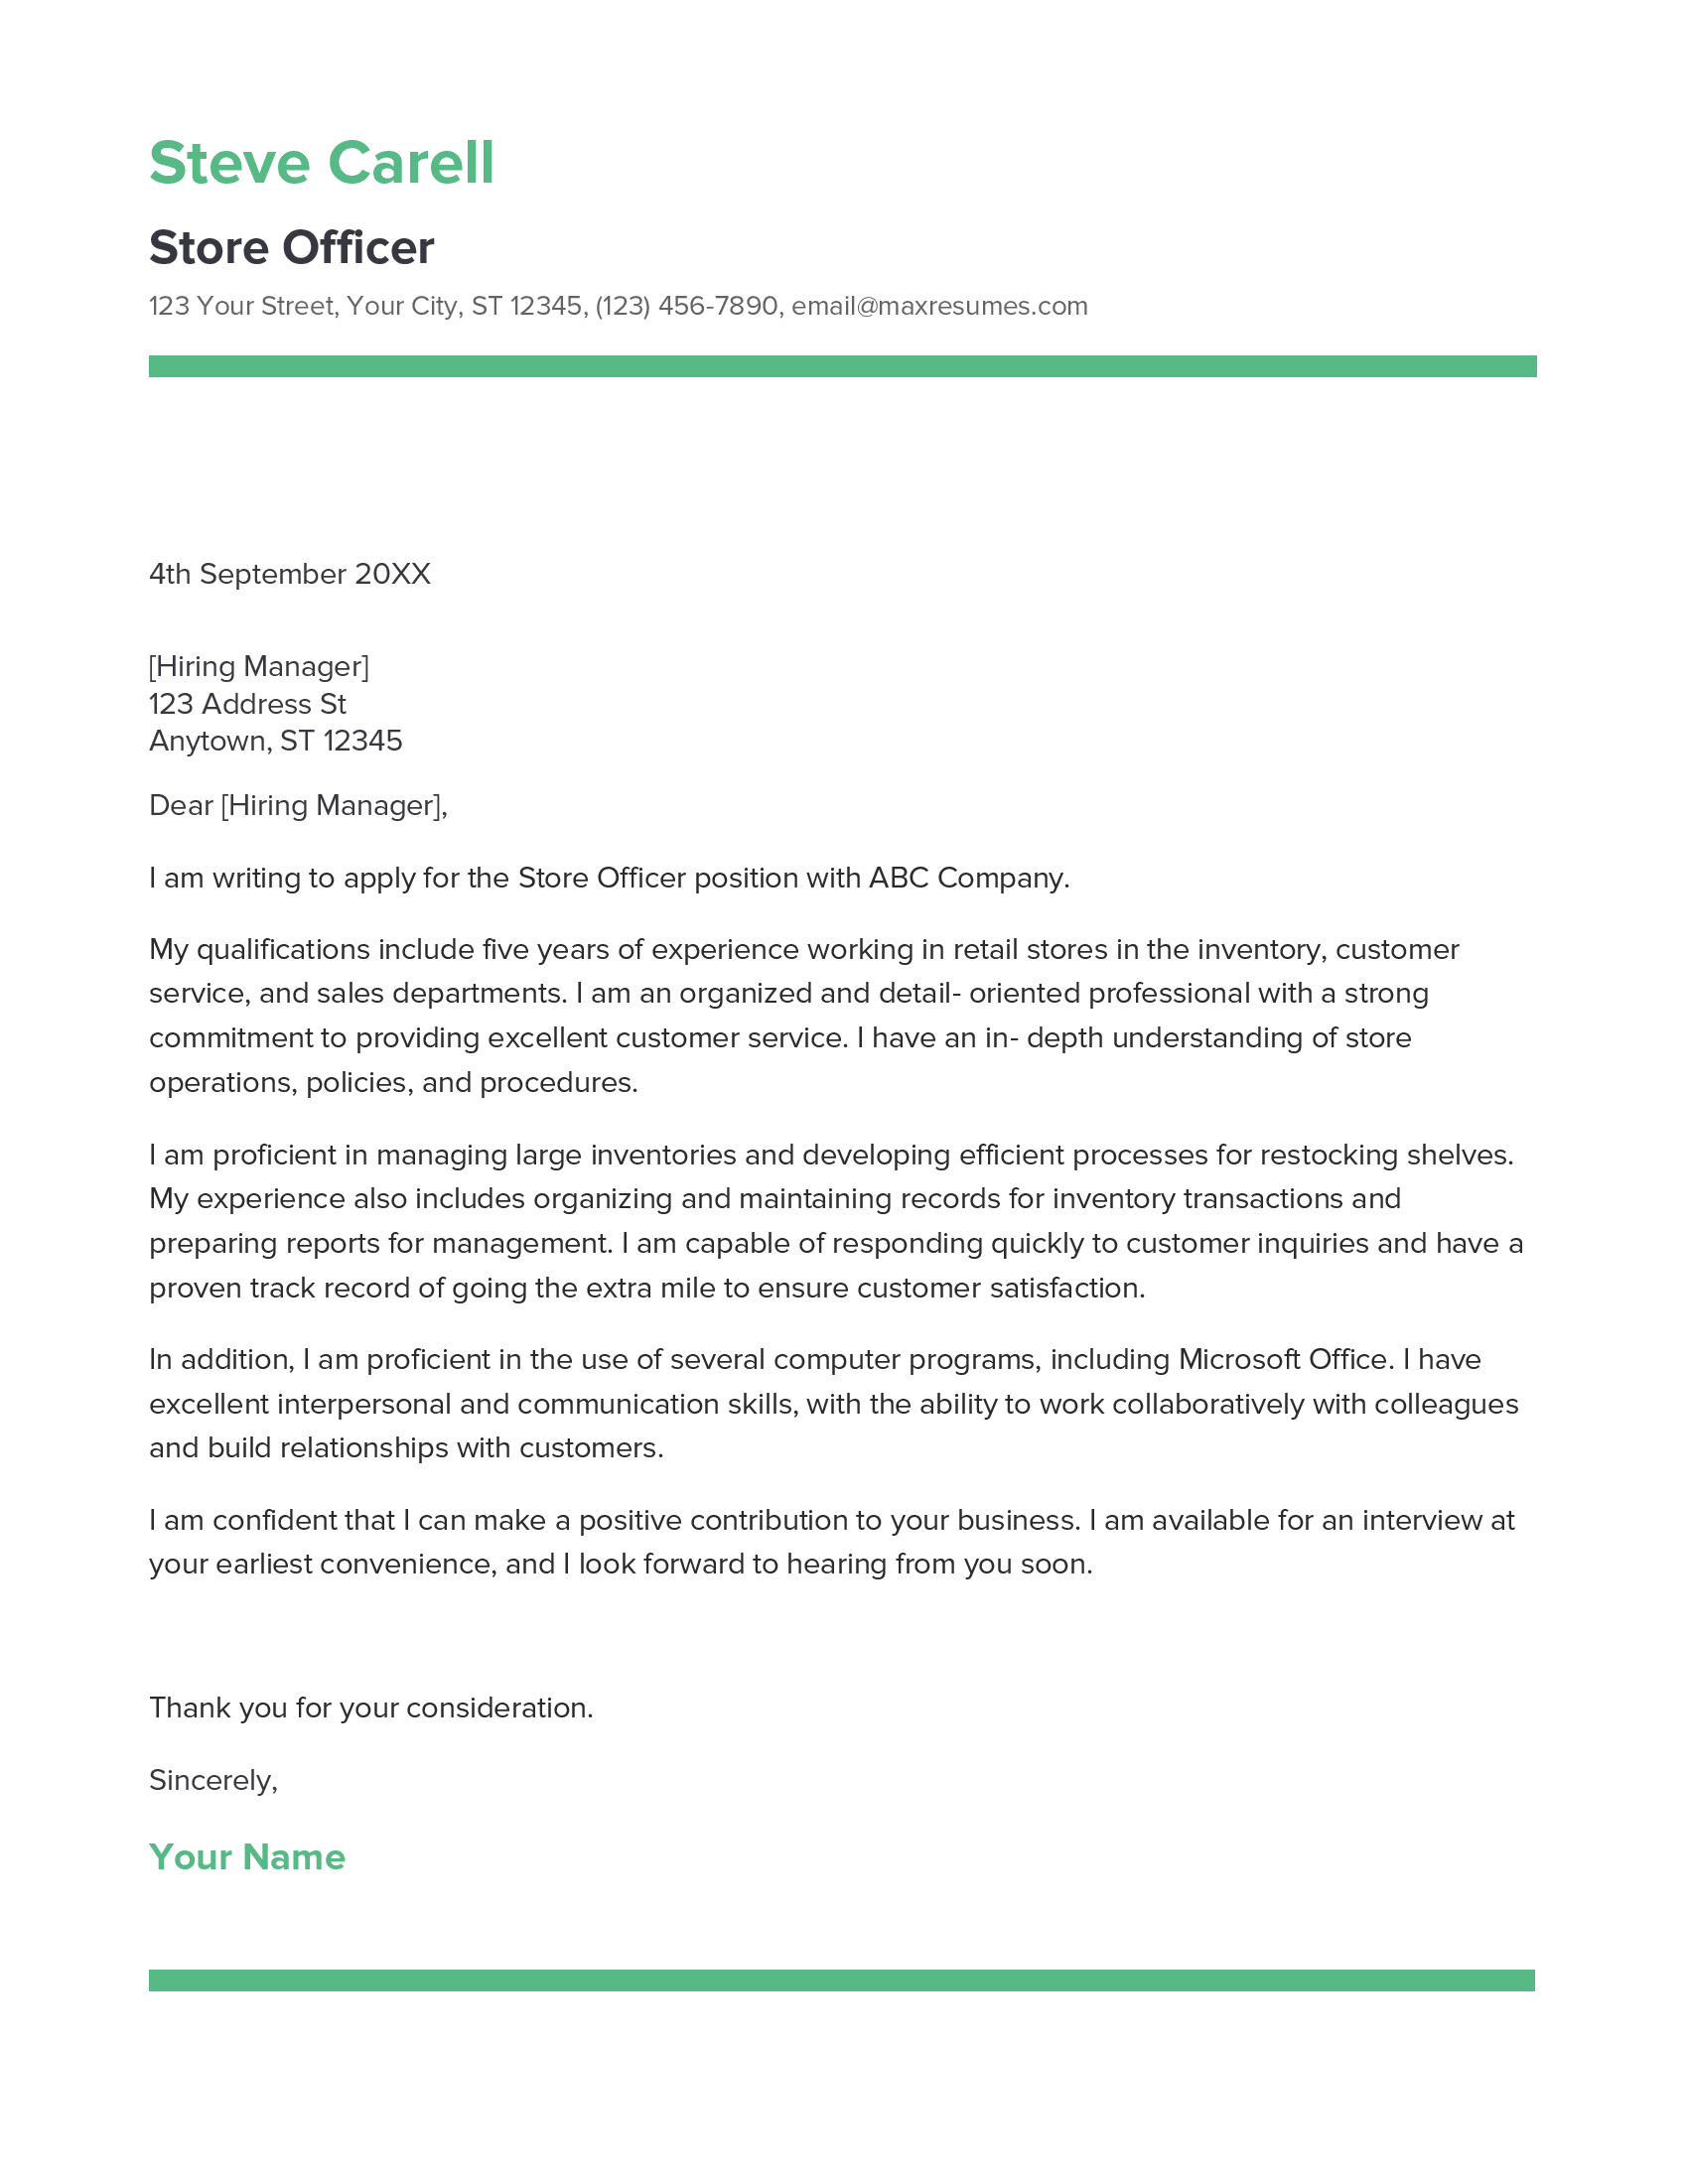 Store Officer Cover Letter Example